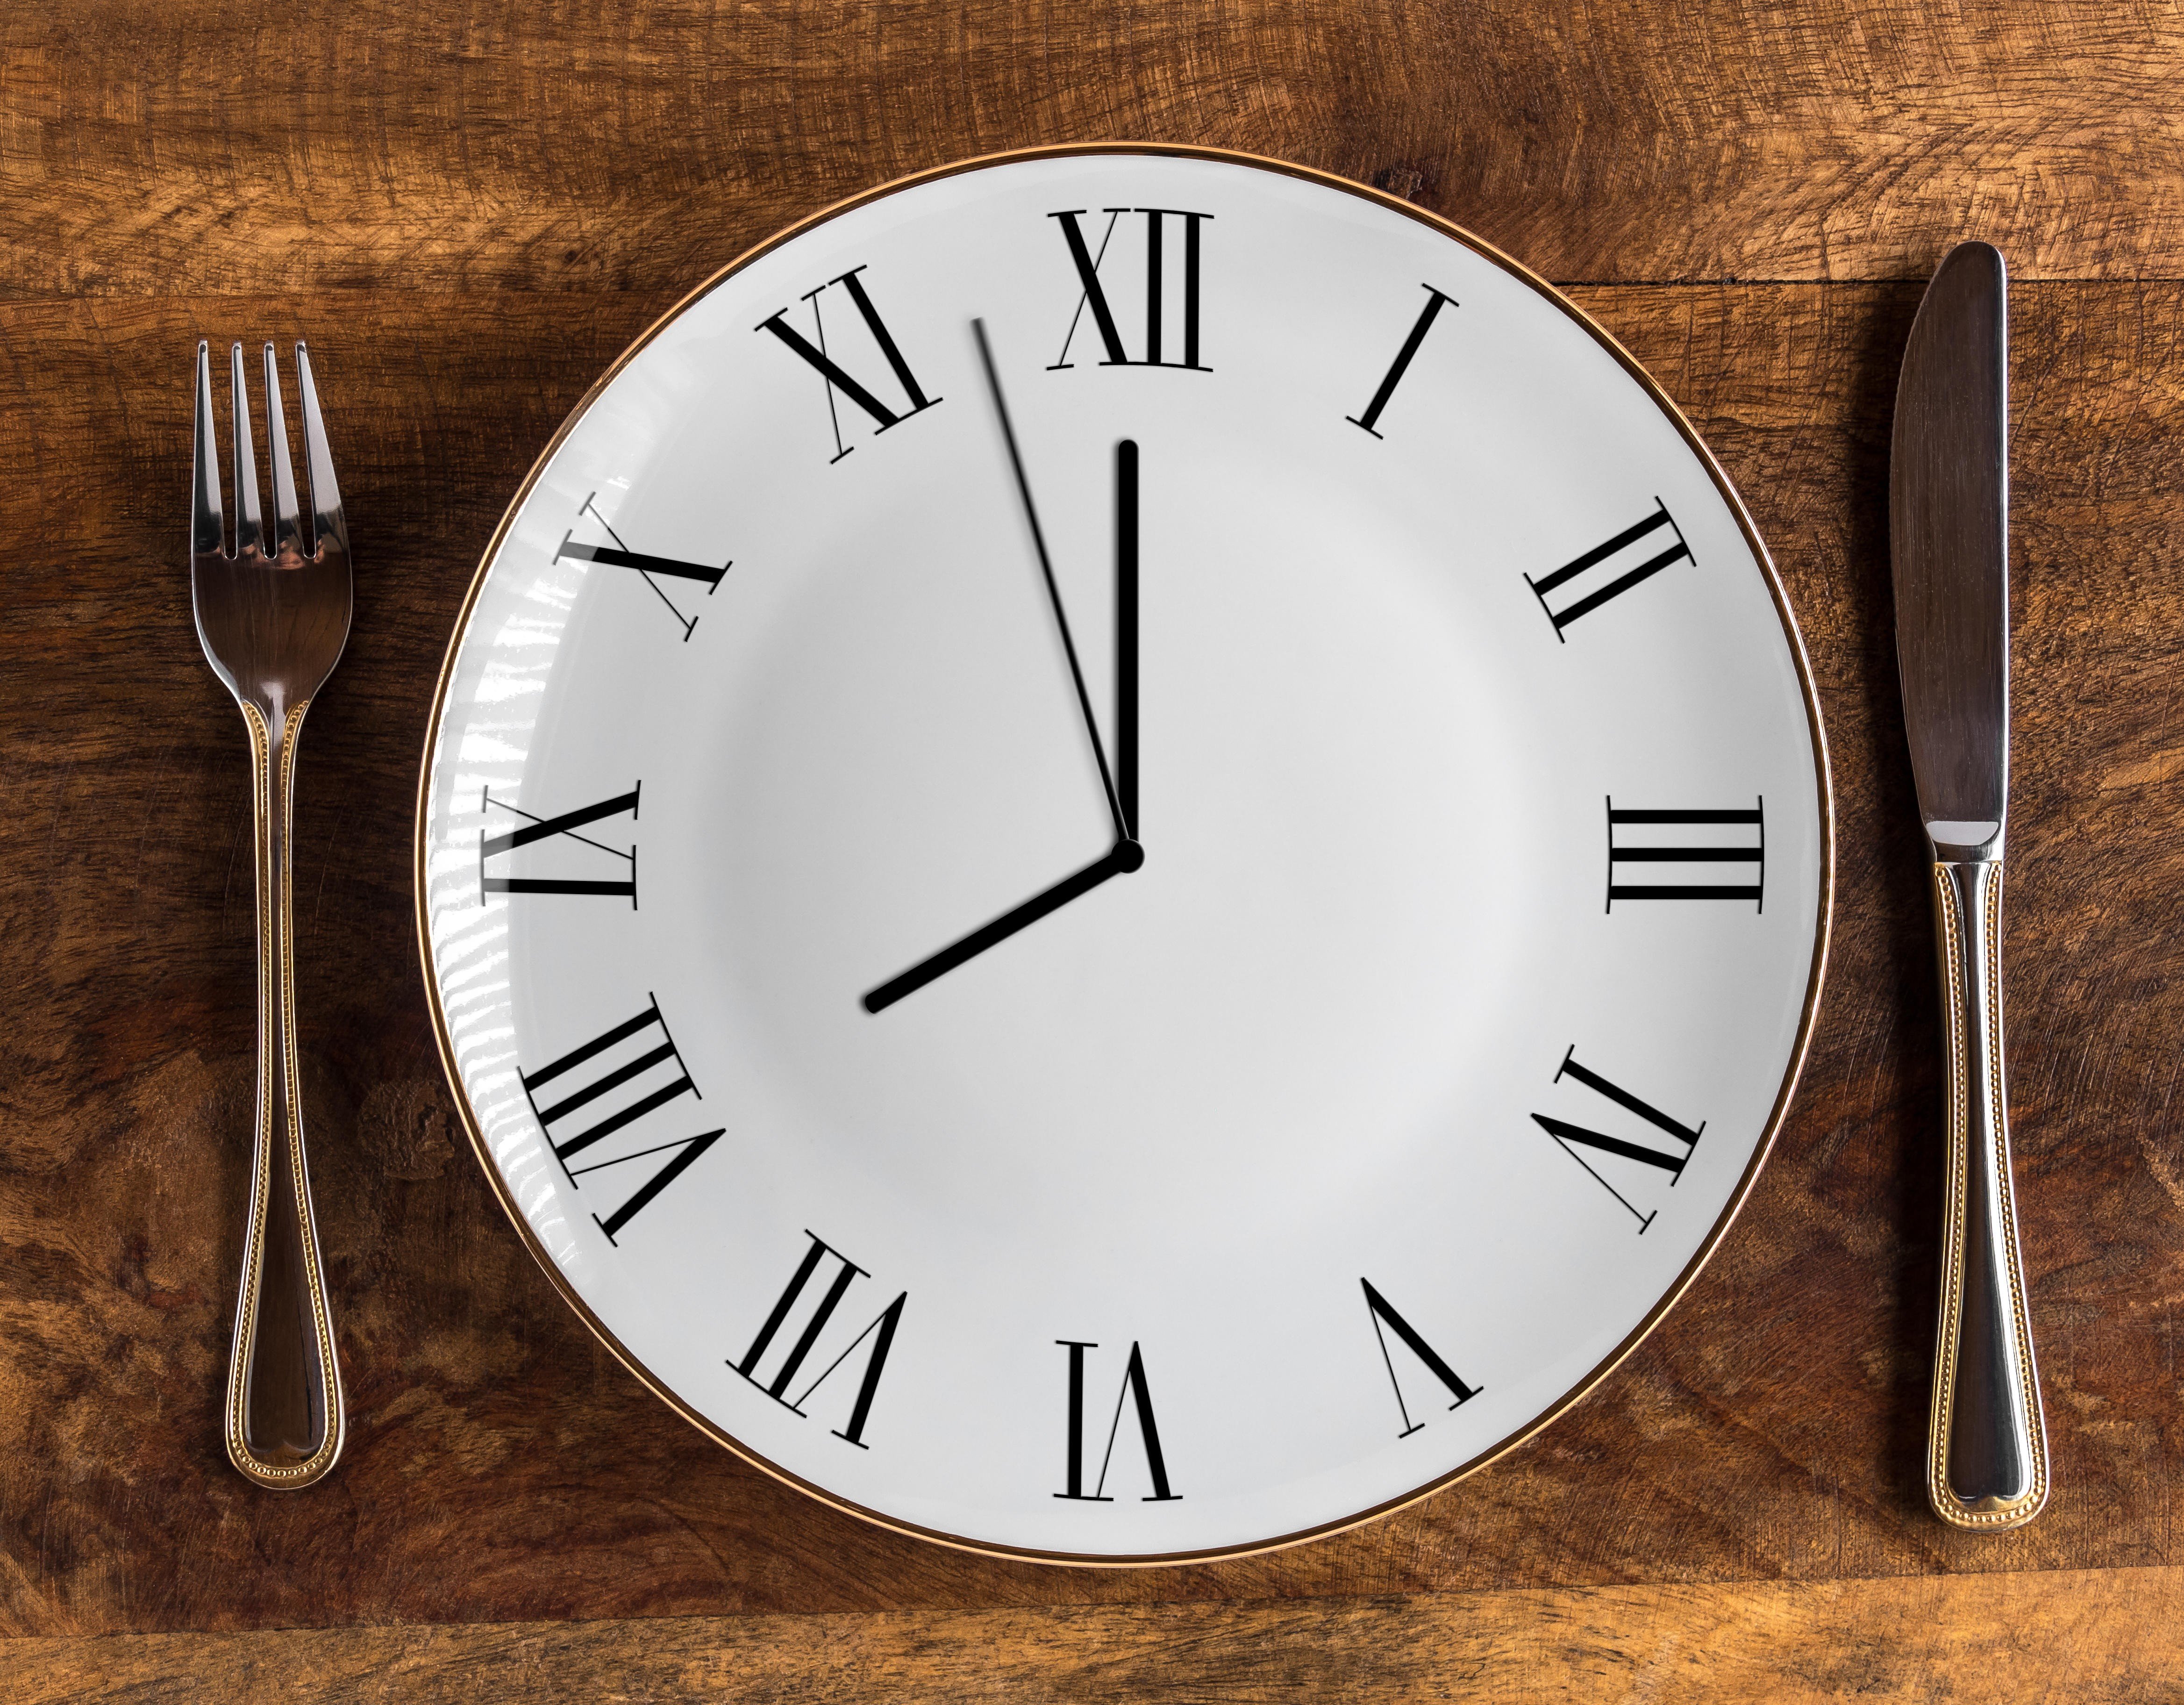 Intermittent fasting is not just about losing weight but averting chronic diseases such as diabetes, hypertension, heart disease and other disorders. Photo: Alamy